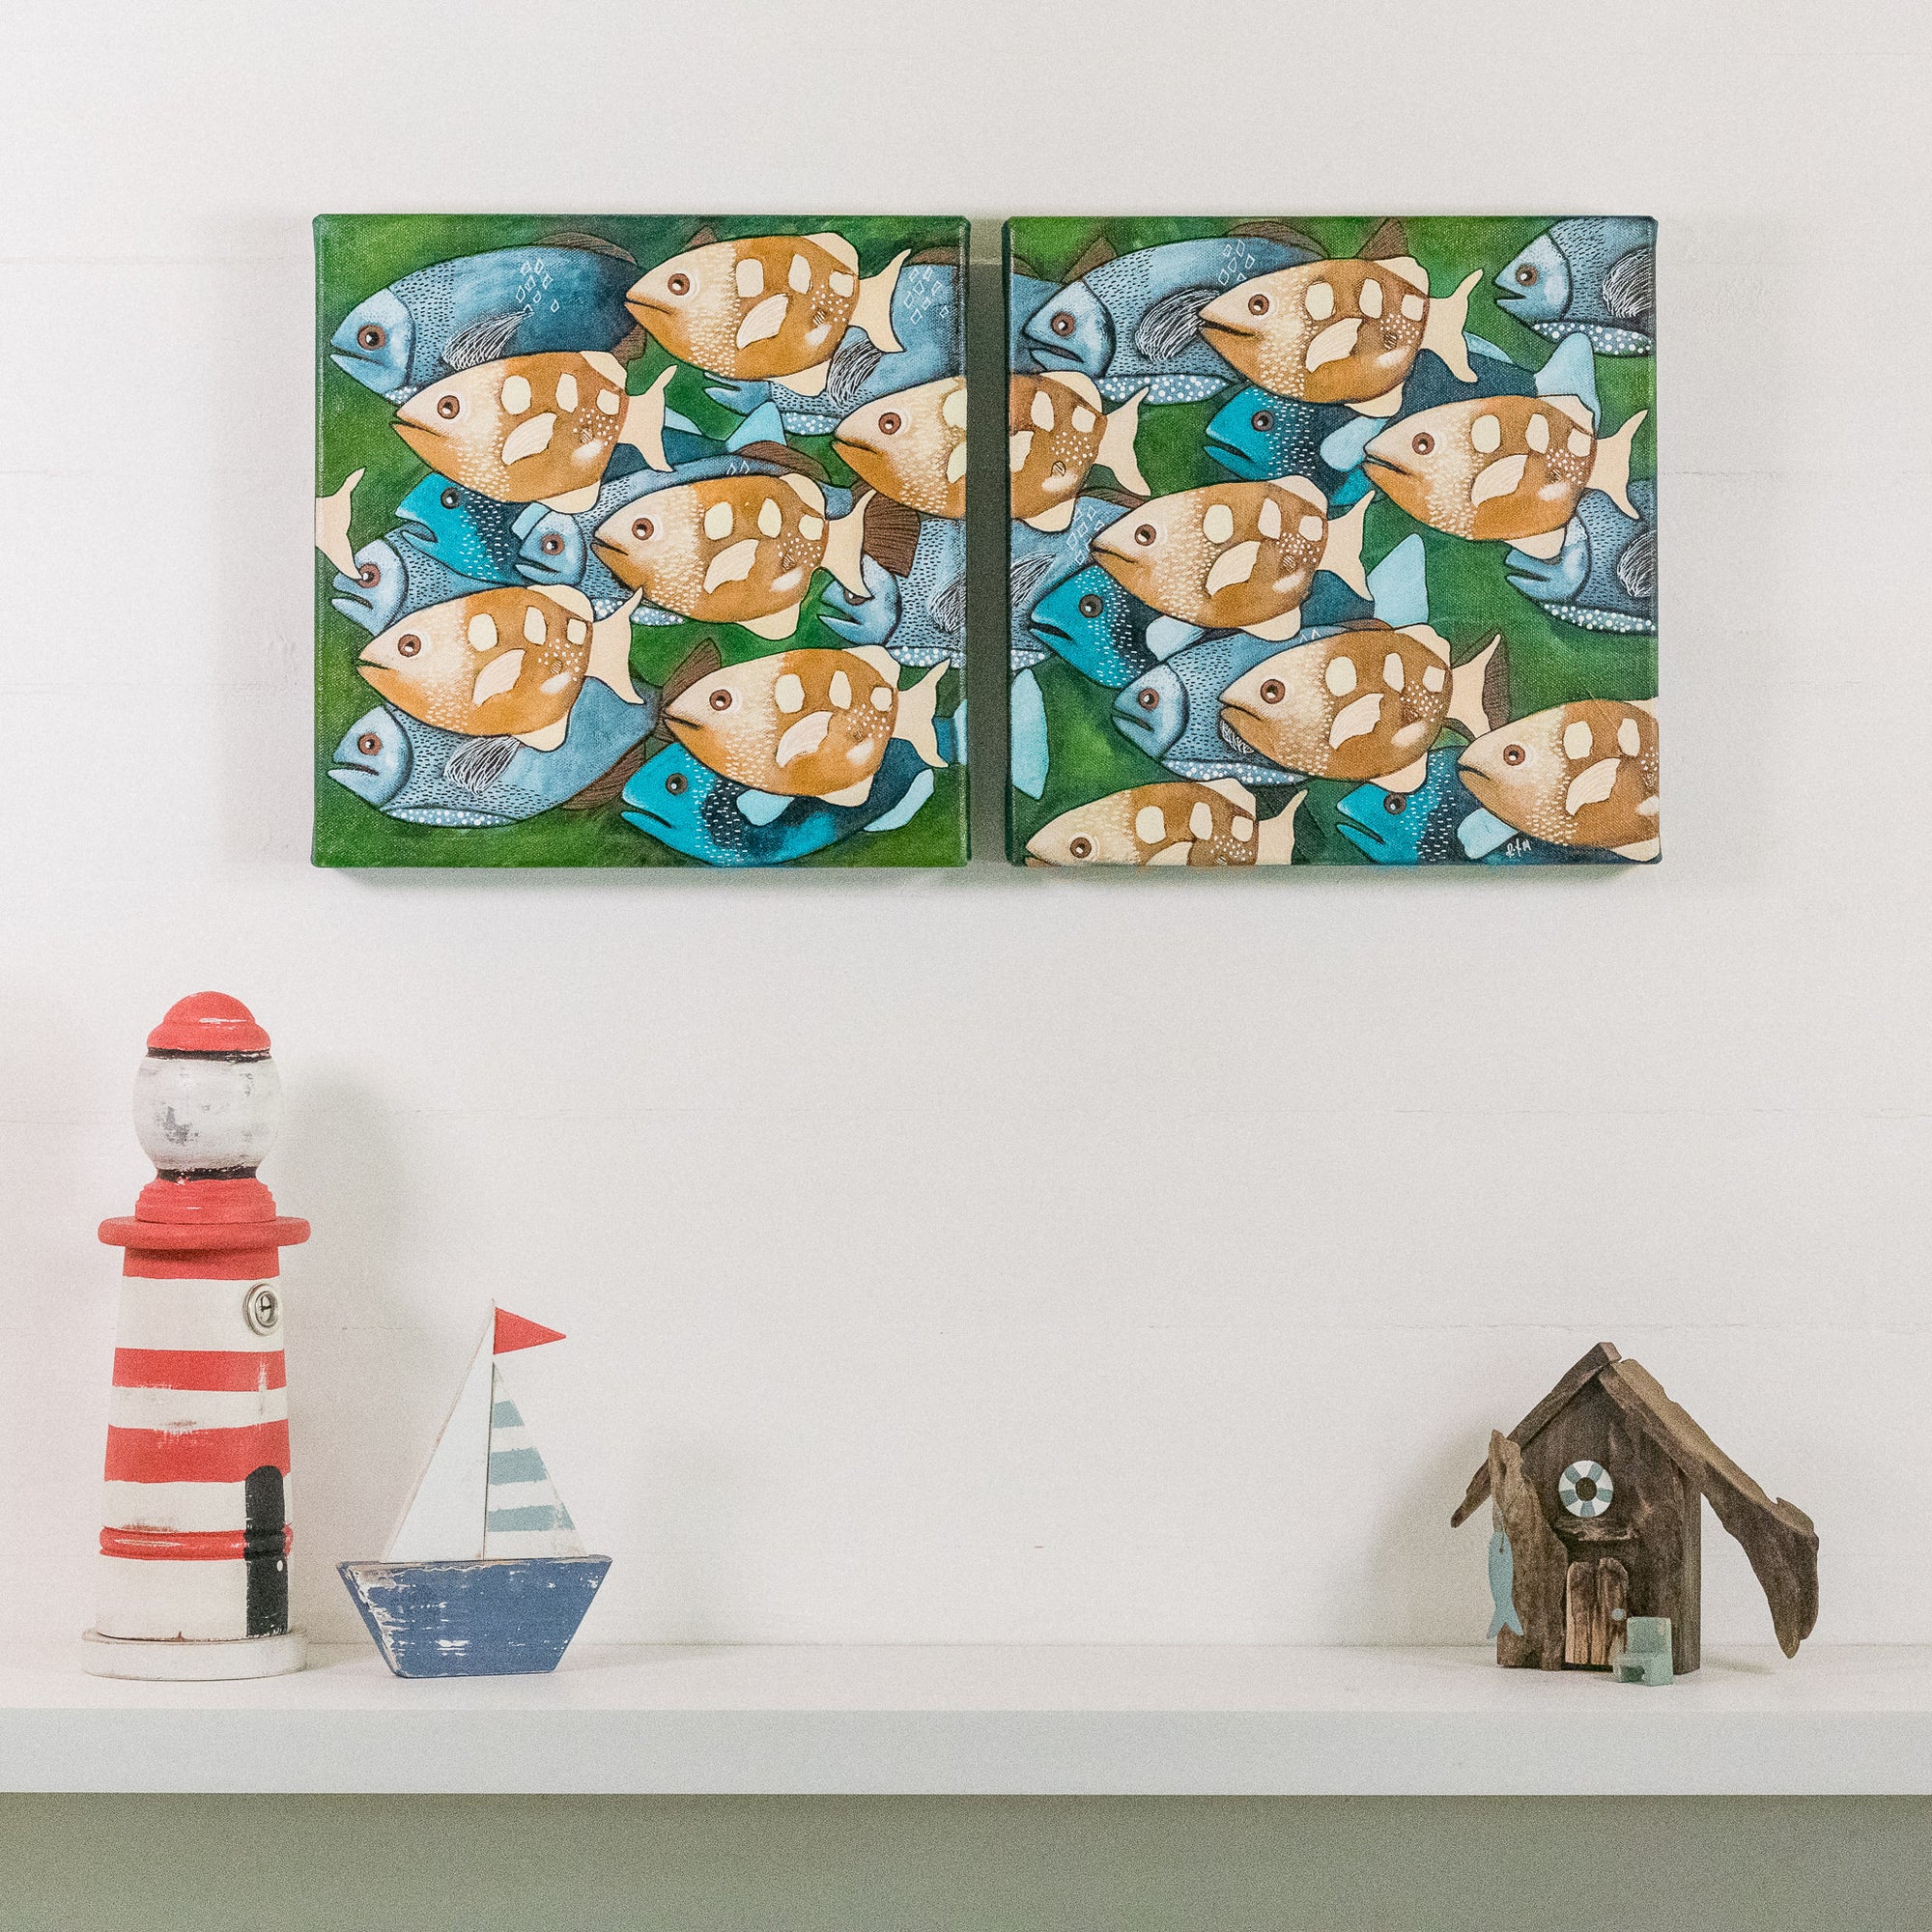 Hurry Up, We're Late, is an original artwork by Rachel Ireland Meyers. This artwork is a diptych (2 separate canvases) with a group of archerfish in blue hues, warm caramel, set against a green background. Available online, www.rimmad.com